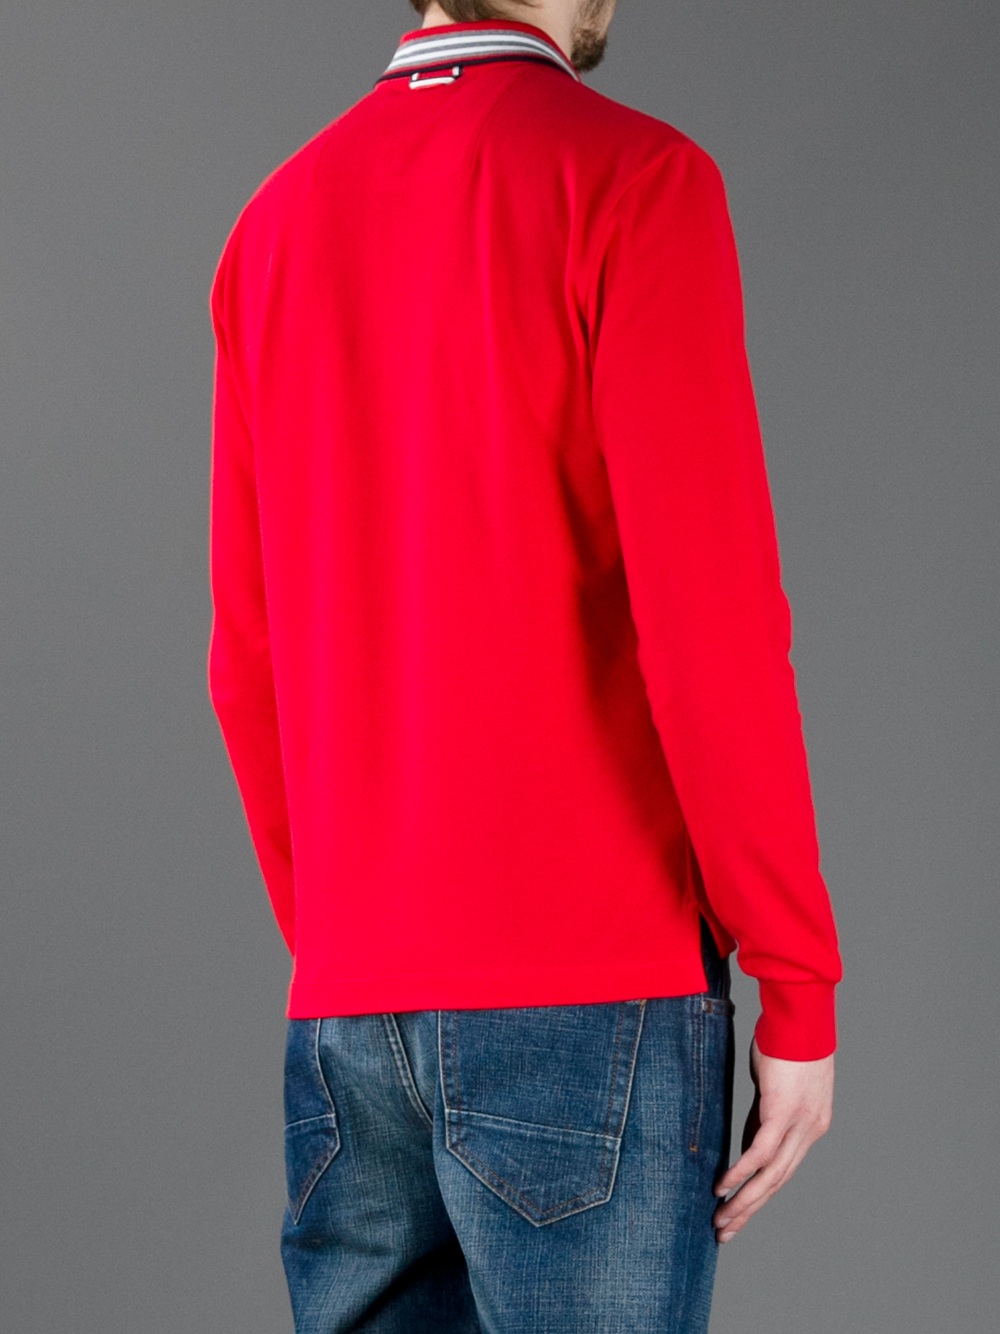 Moncler Gamme Bleu Long Sleeve Polo Shirt in Red for Men - Lyst